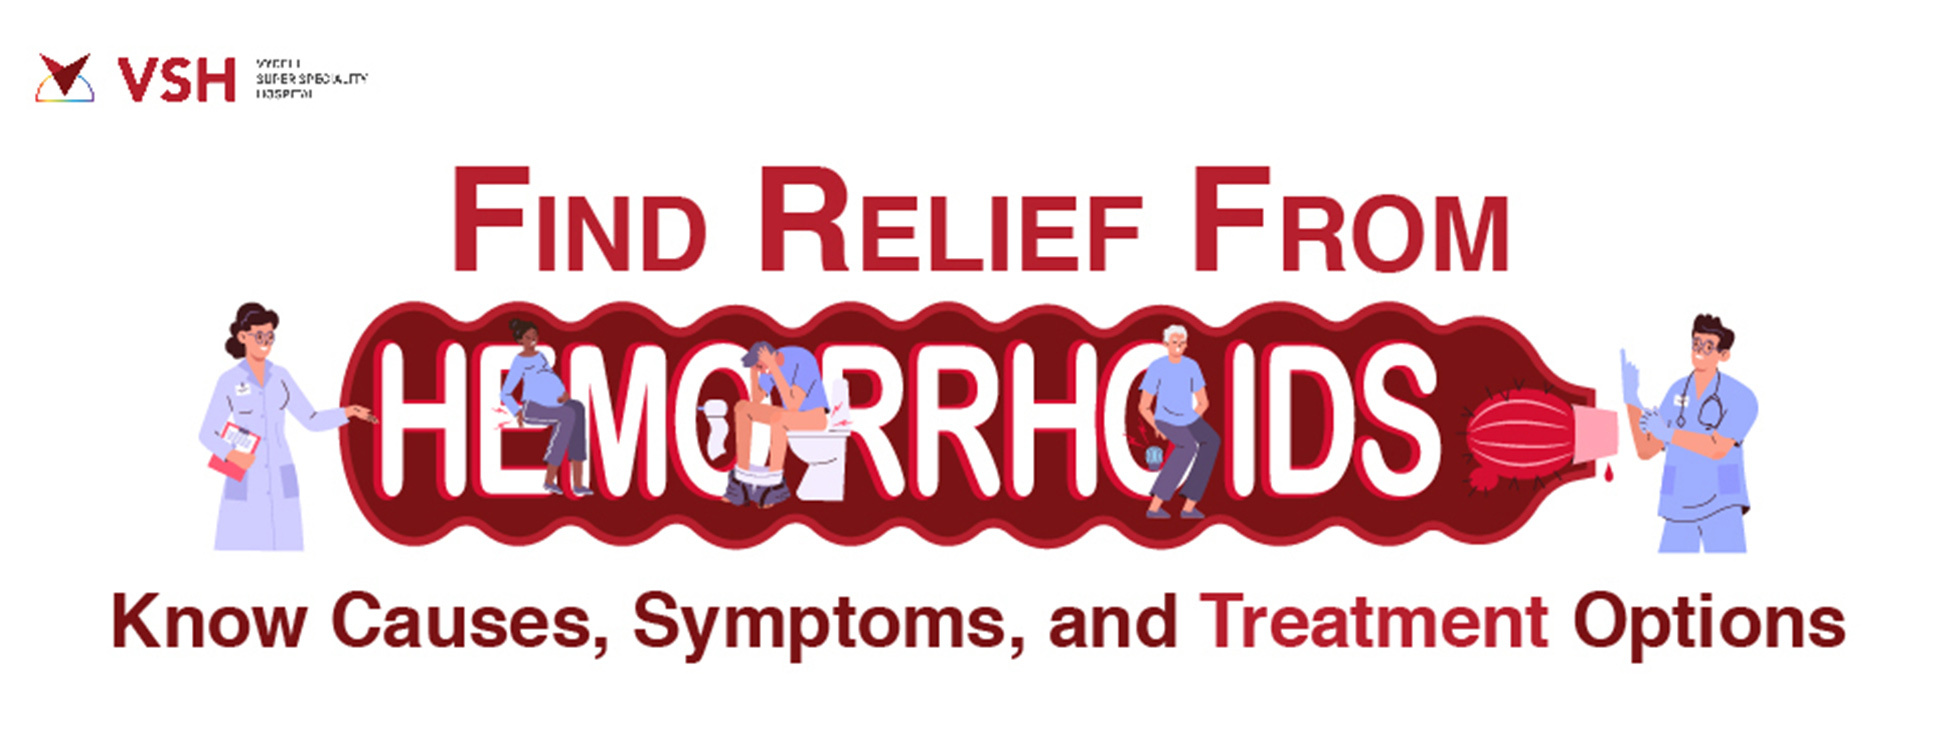 Hemorrhoids: Know Causes, Symptoms, and Treatment Options